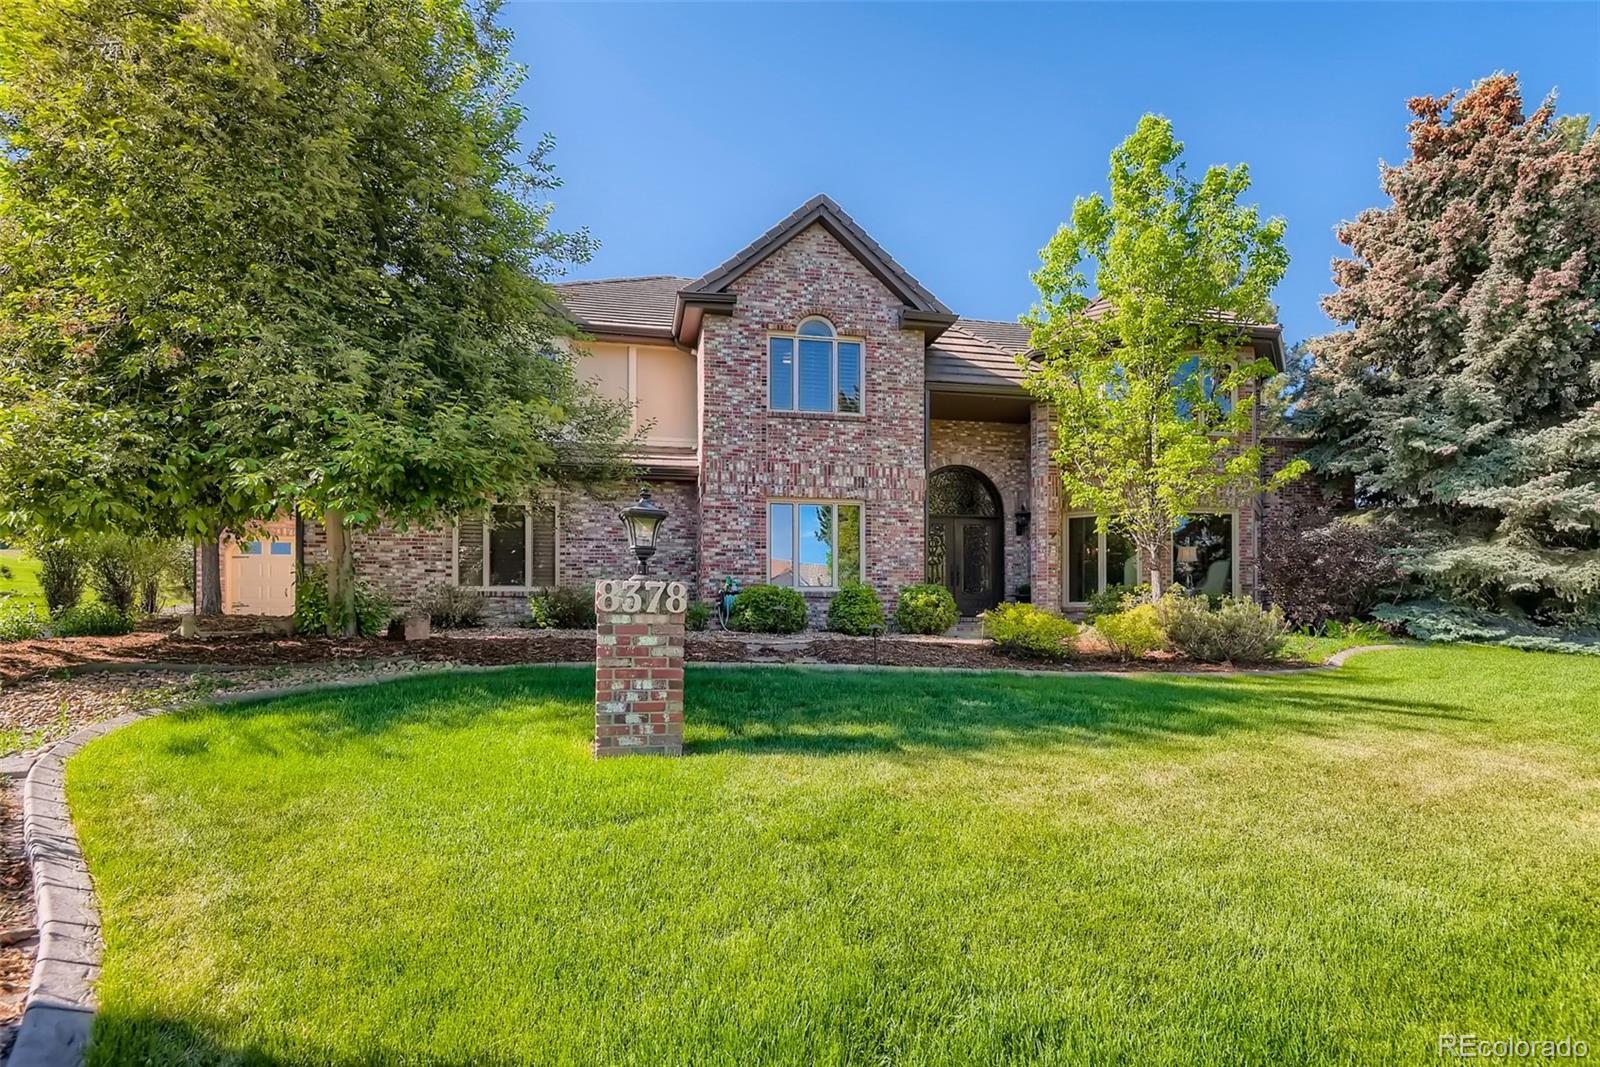 8378 Colonial Drive, Lone Tree, CO 80124 - #: 1612322